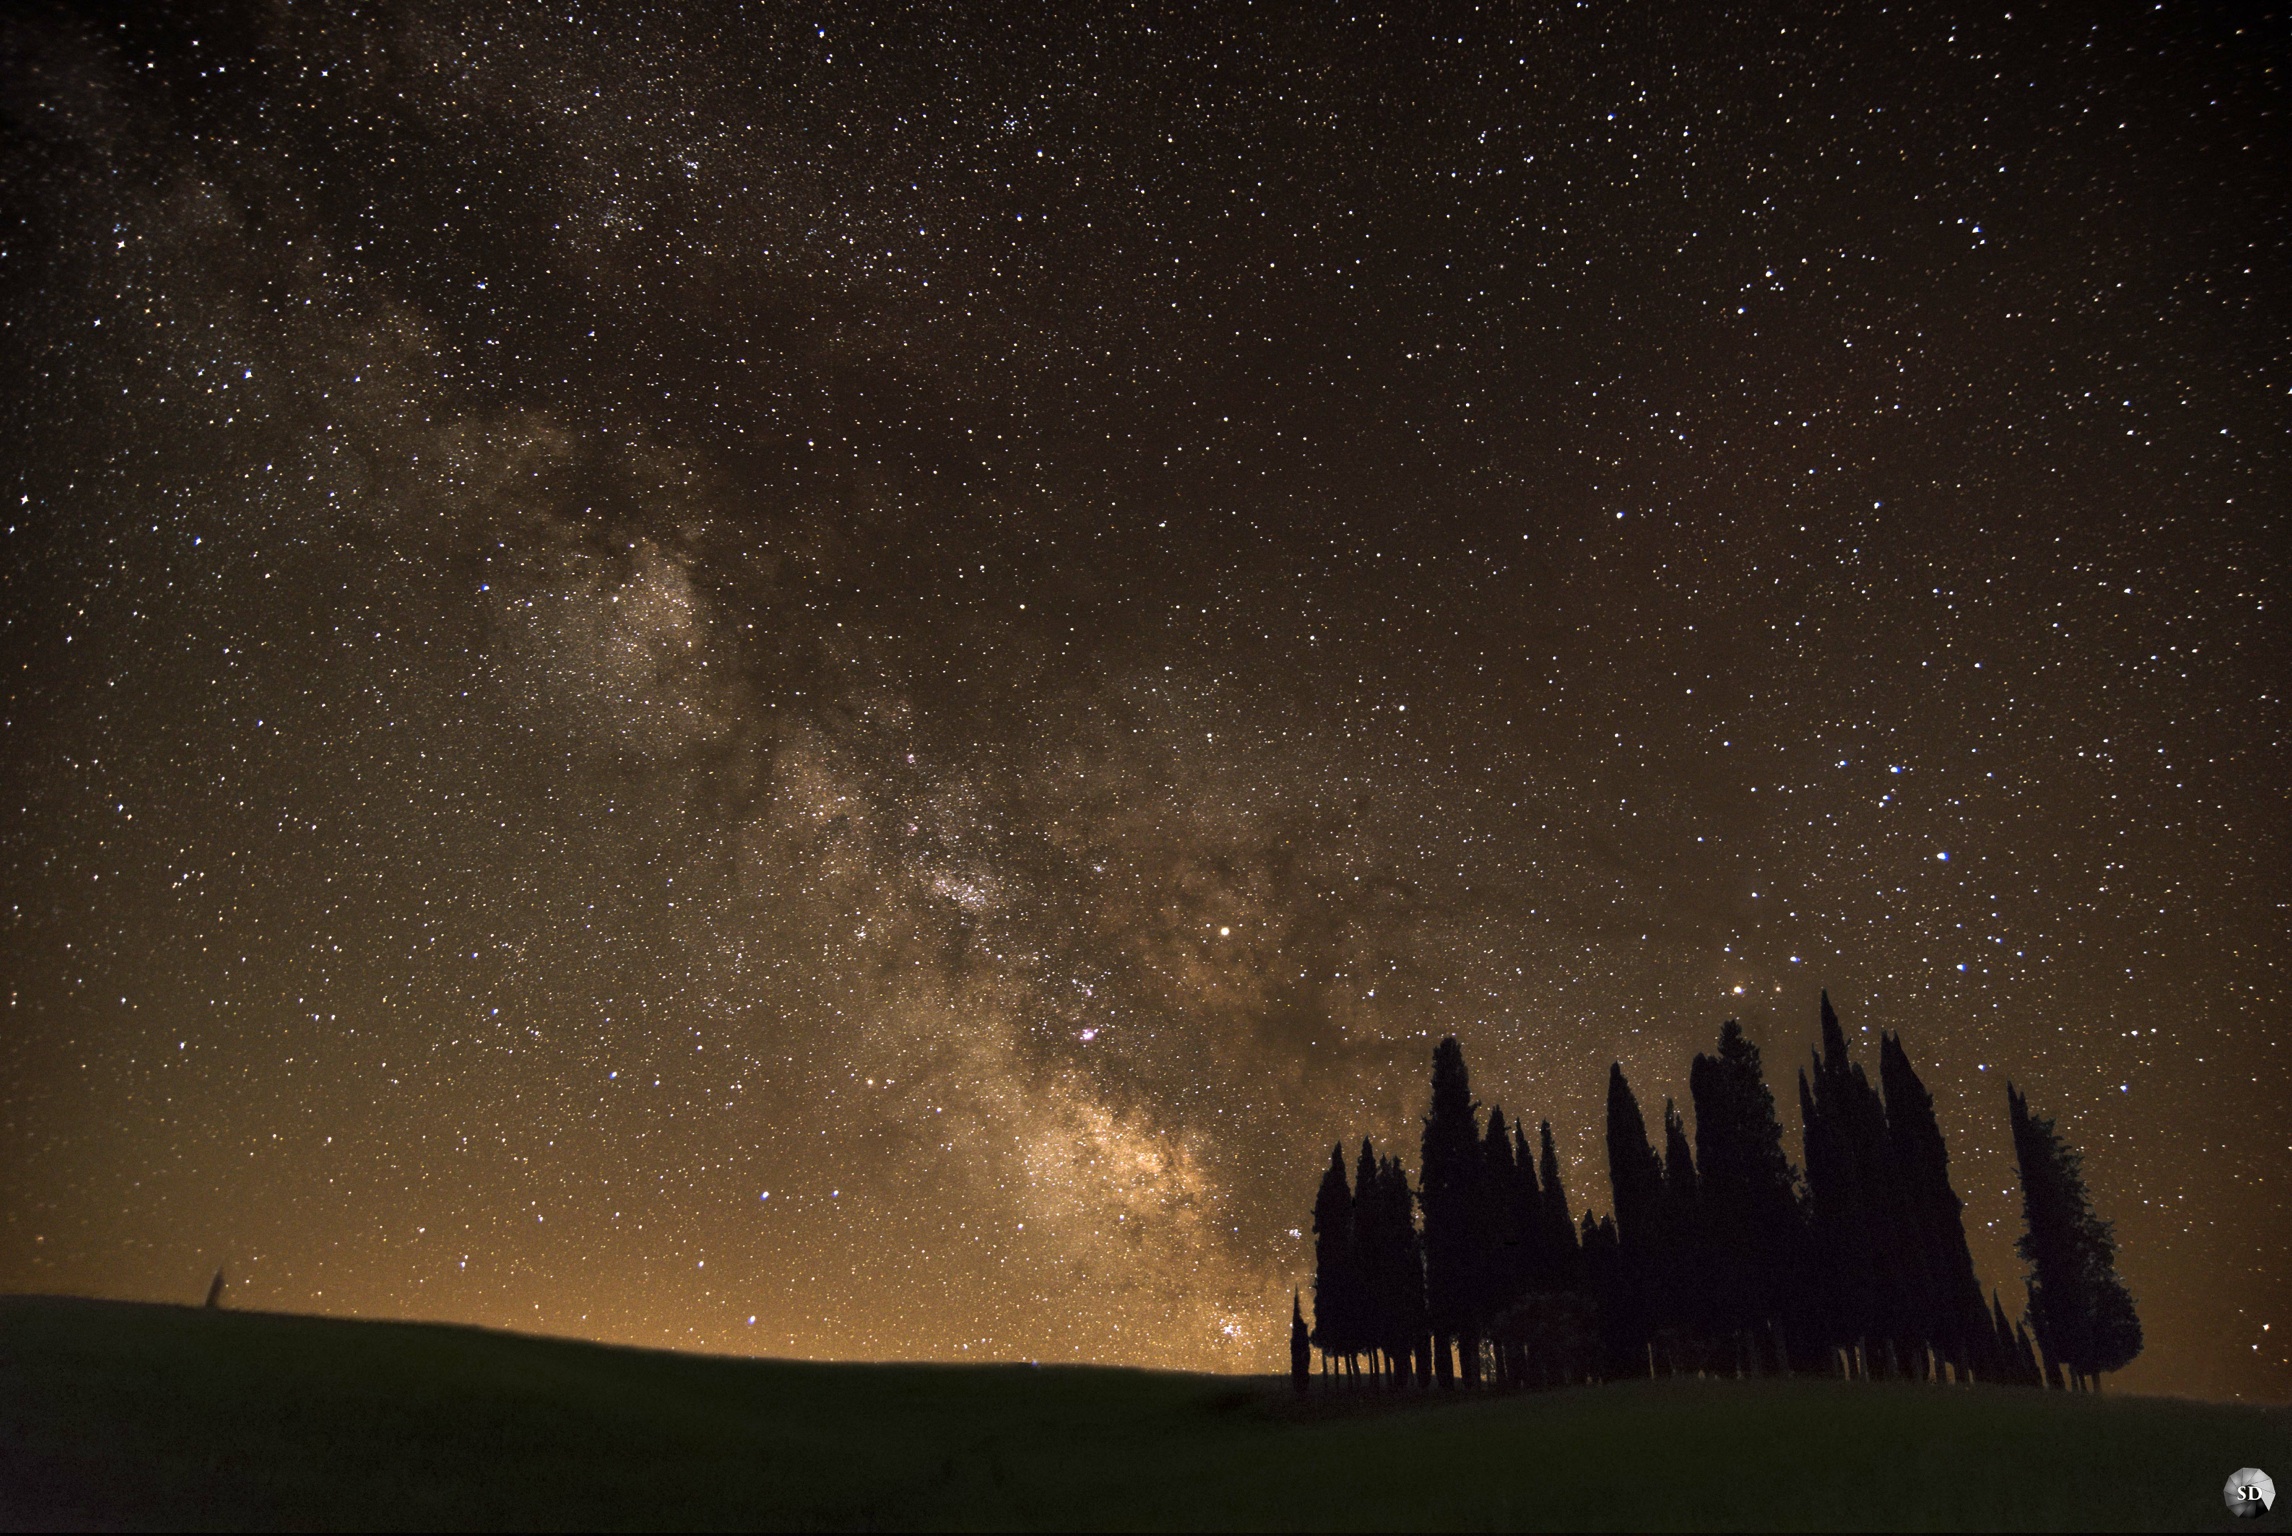 The Cypresses and the Milky Way...